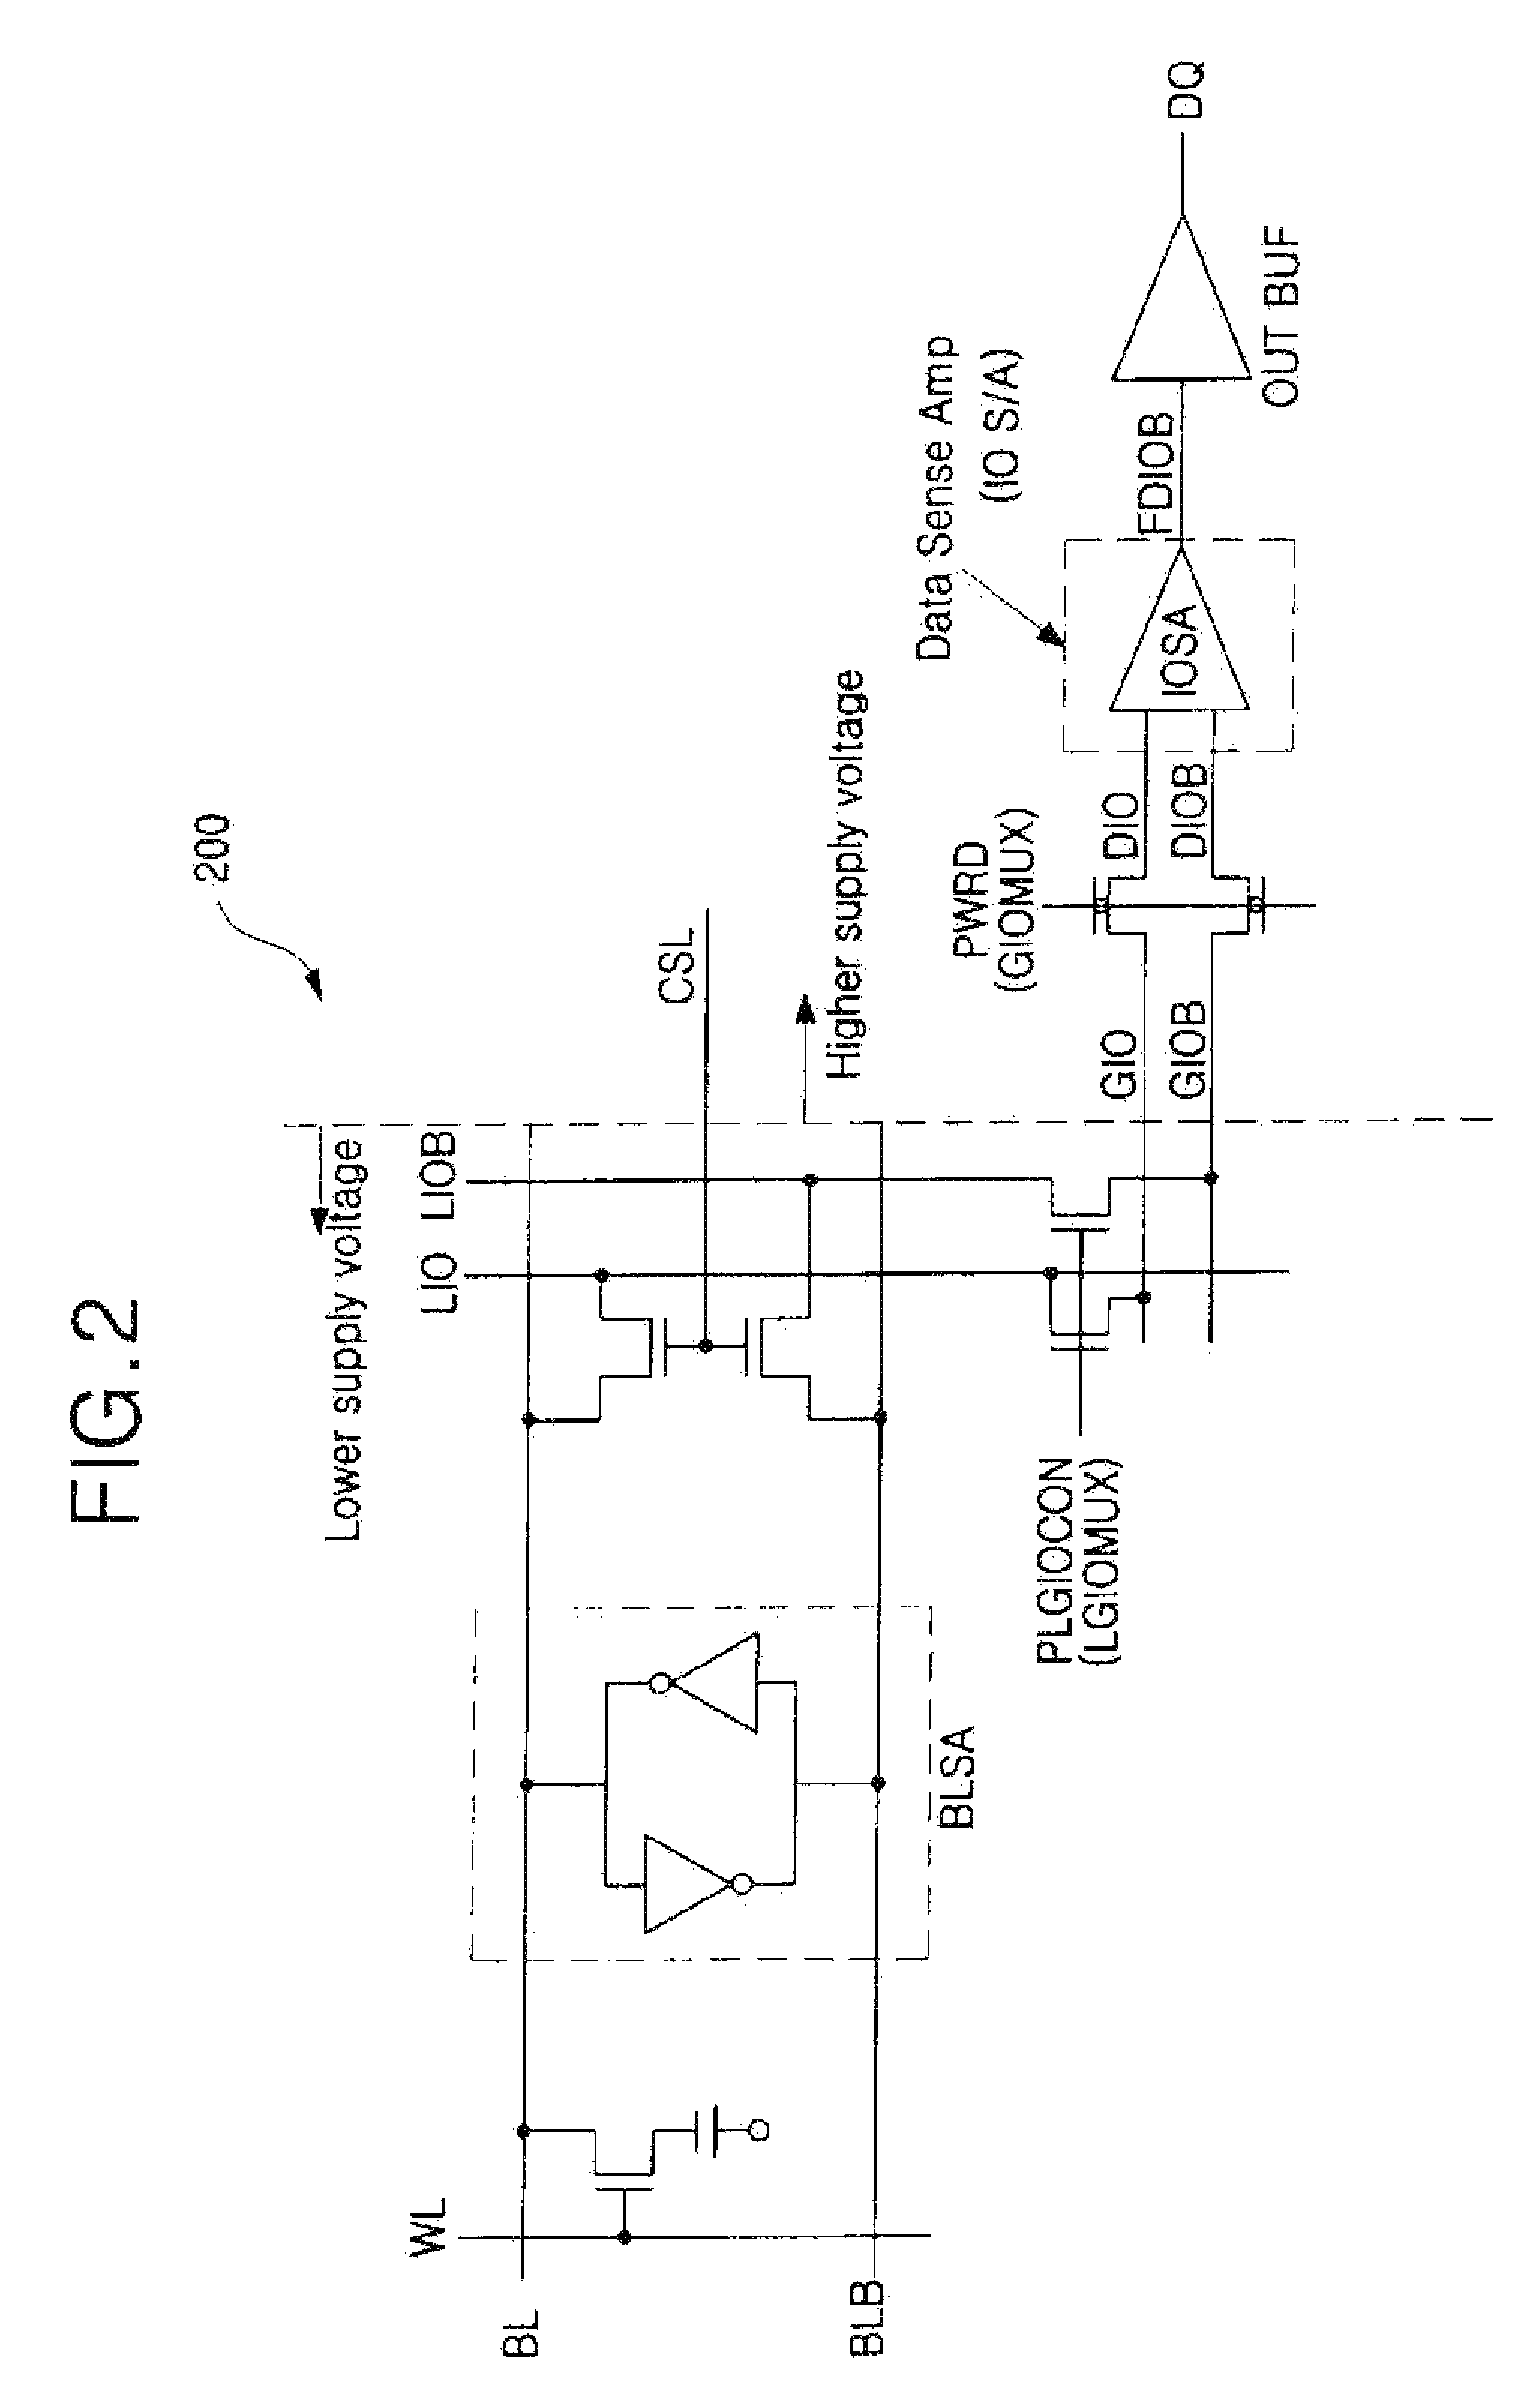 Memory device with separate read and write gate voltage controls